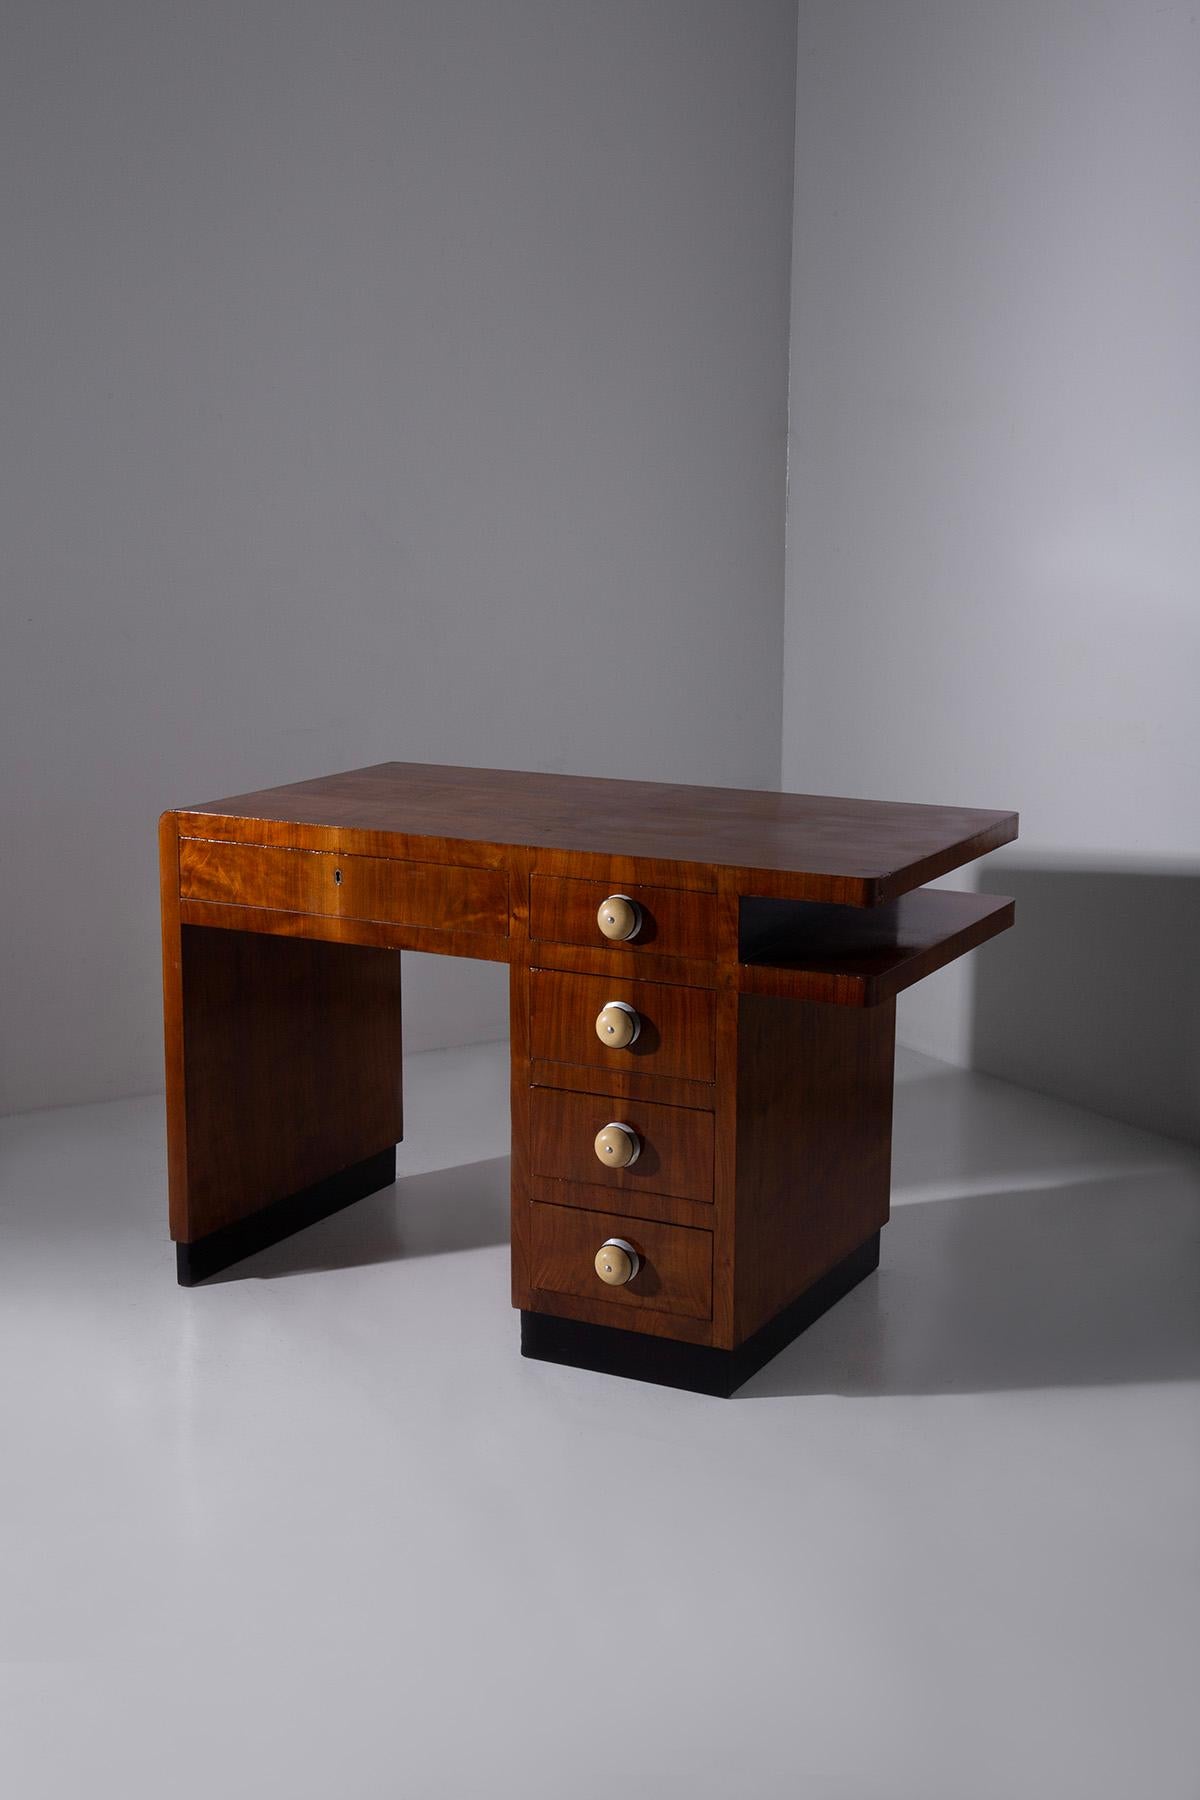 Here is a desk of timeless elegance, an exquisite creation of the Rationalist period in Italy. Crafted with meticulous precision, this Italian desk perfectly combines the warmth of wood with the elegant charm of aluminum metal.

The wood chosen for